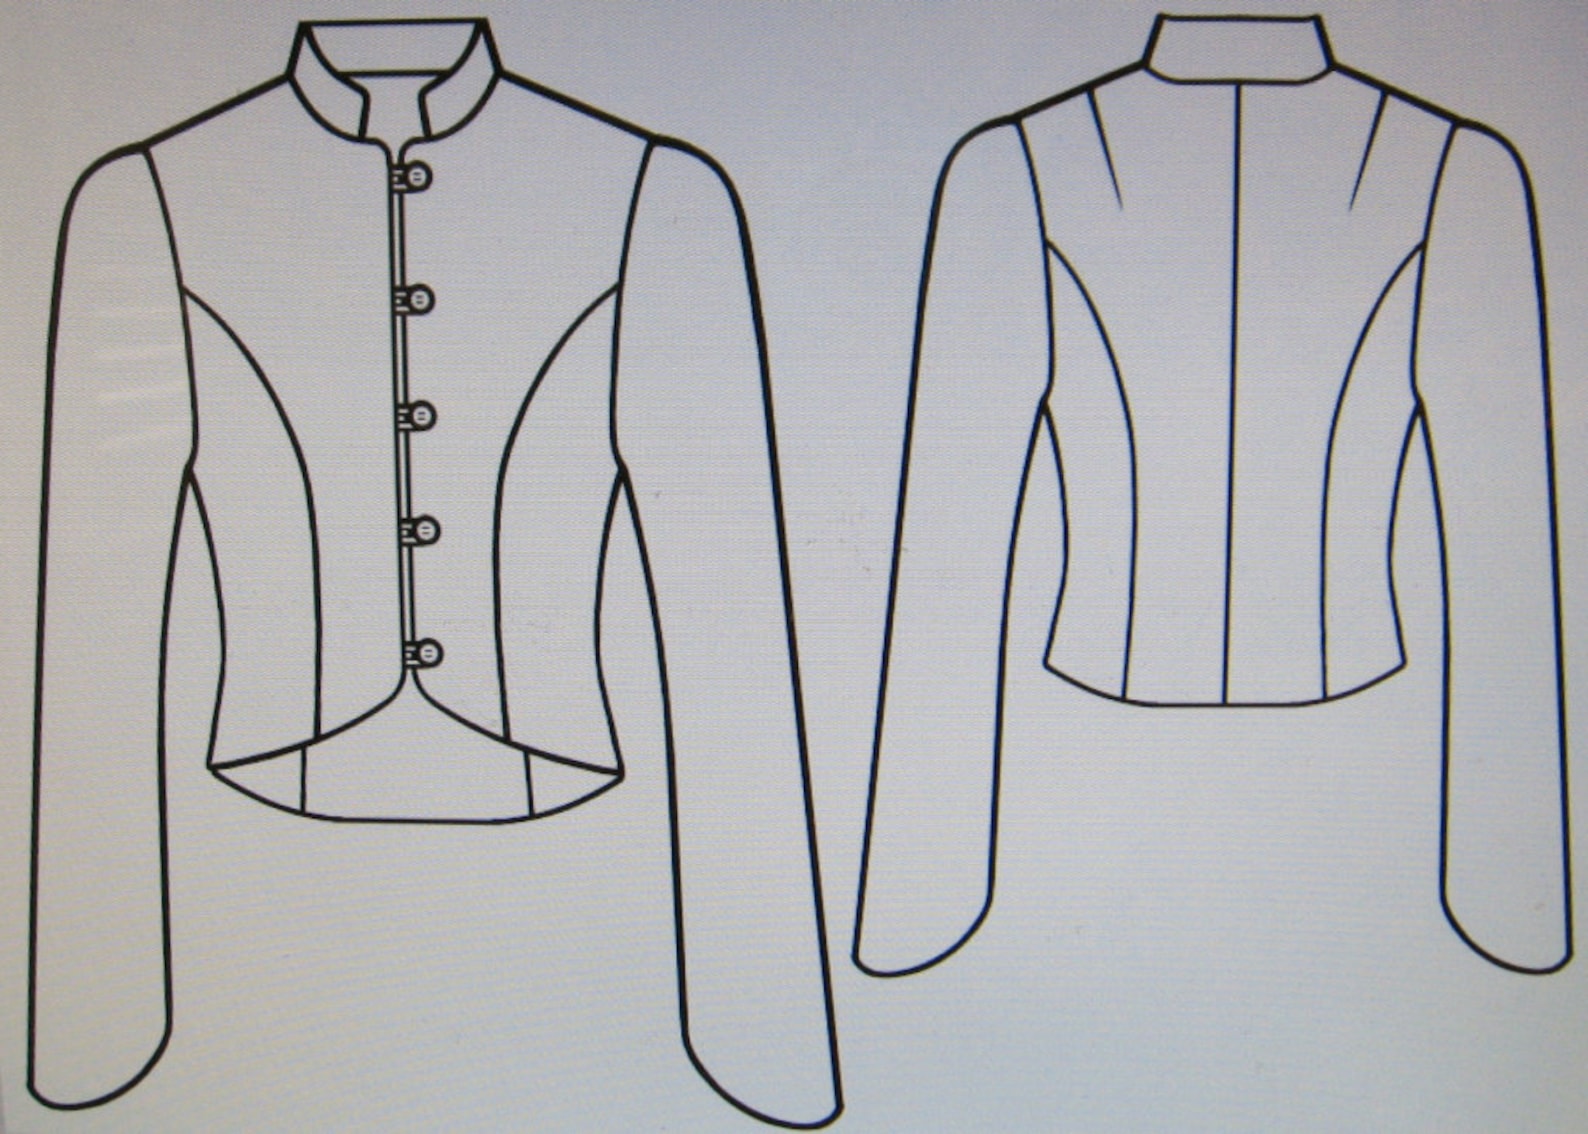 doll-pattern-pdf-12-inch-jacket-collection-patterns-for-etsy